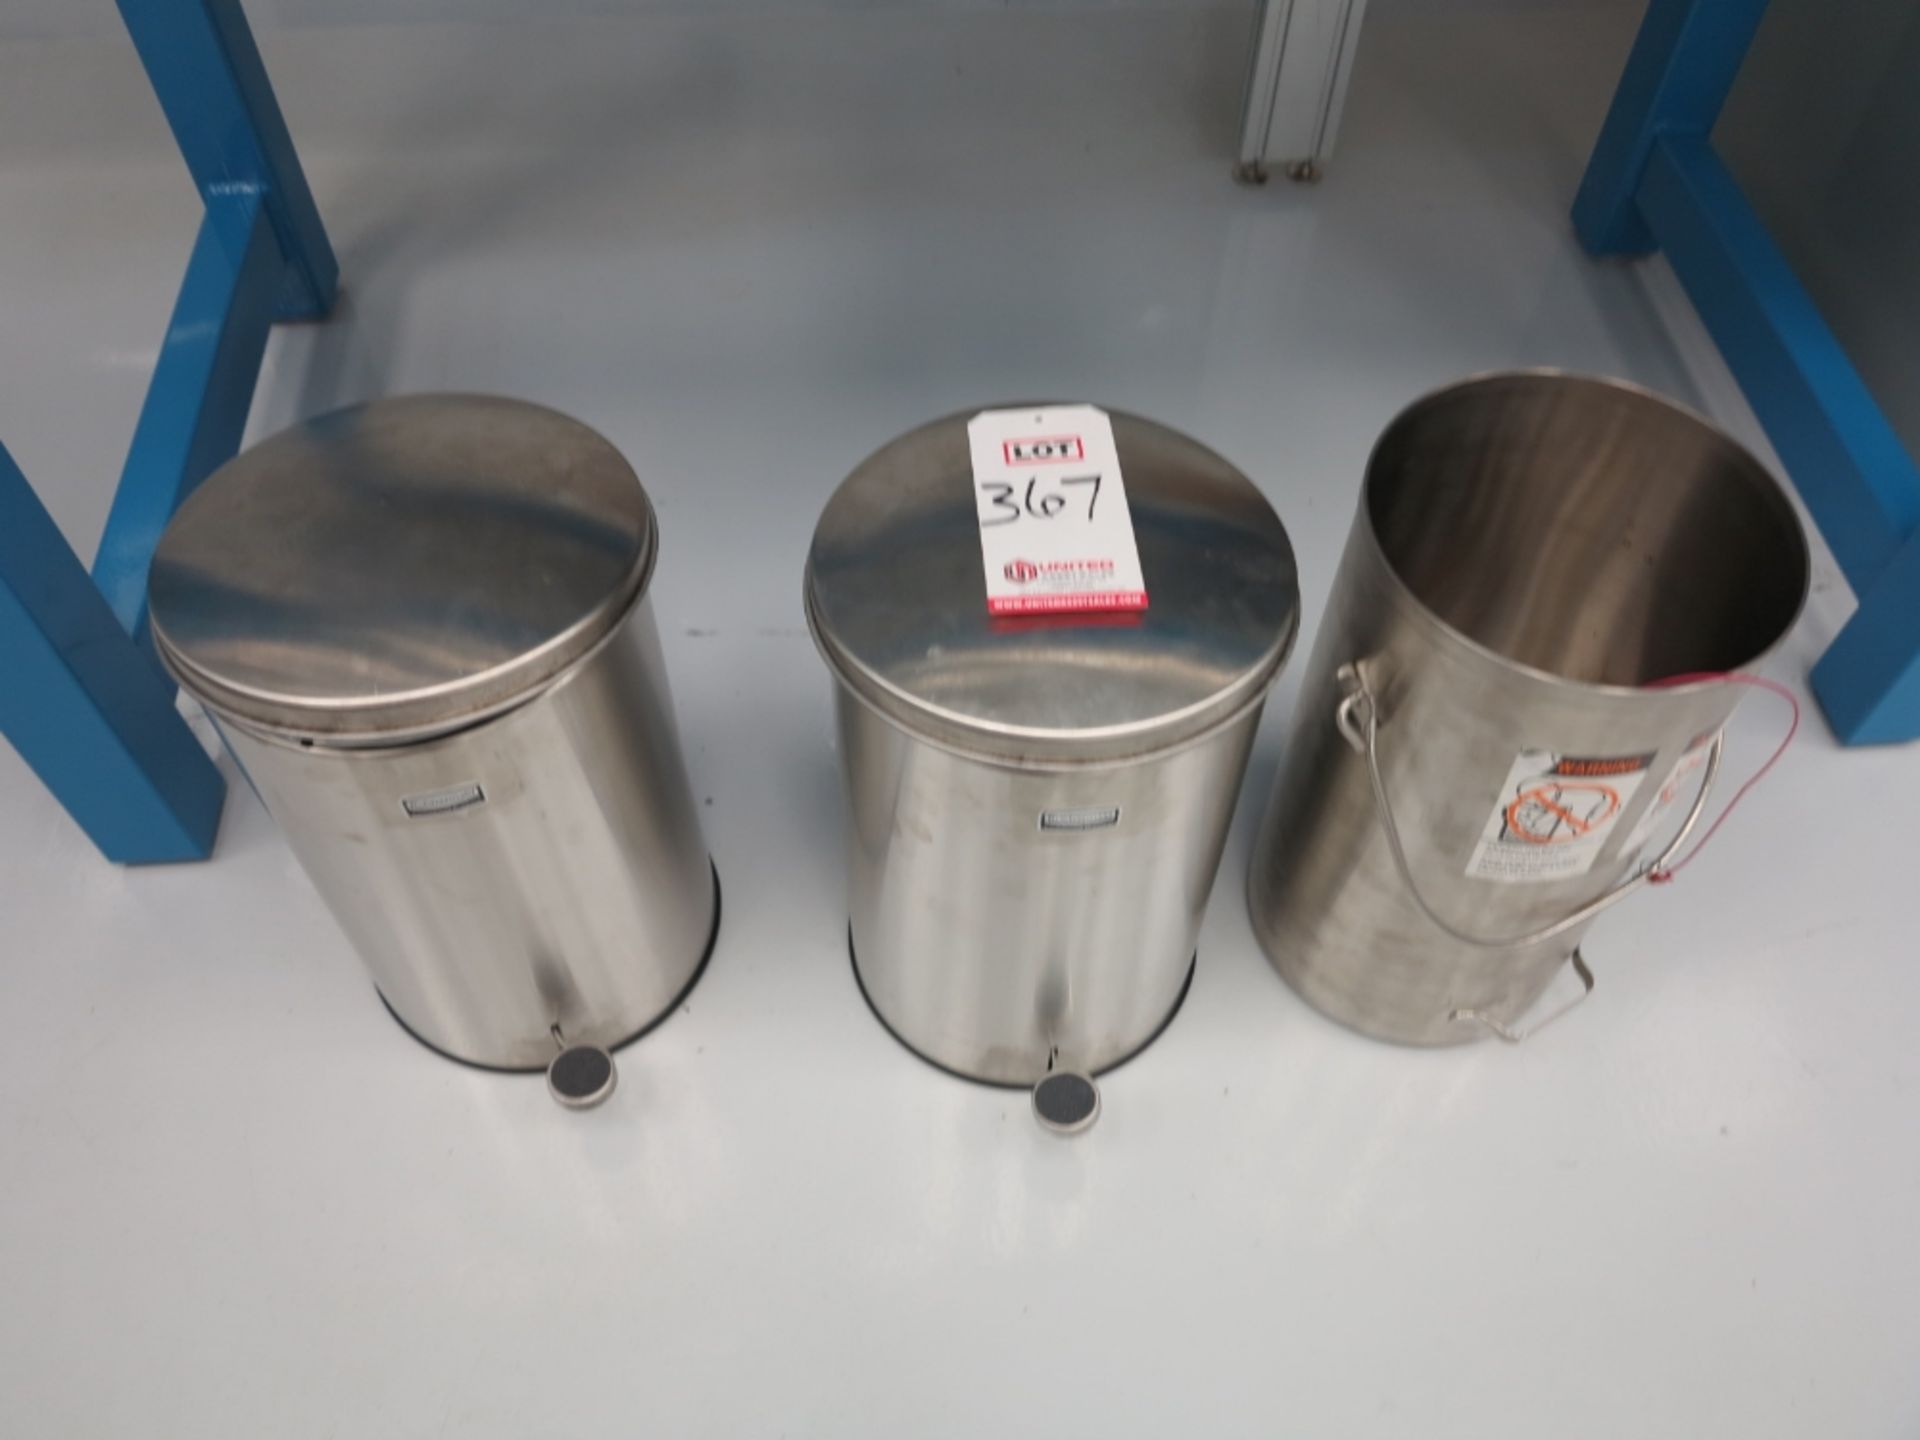 LOT - (3) FOOT OPERATED TRASH CANS